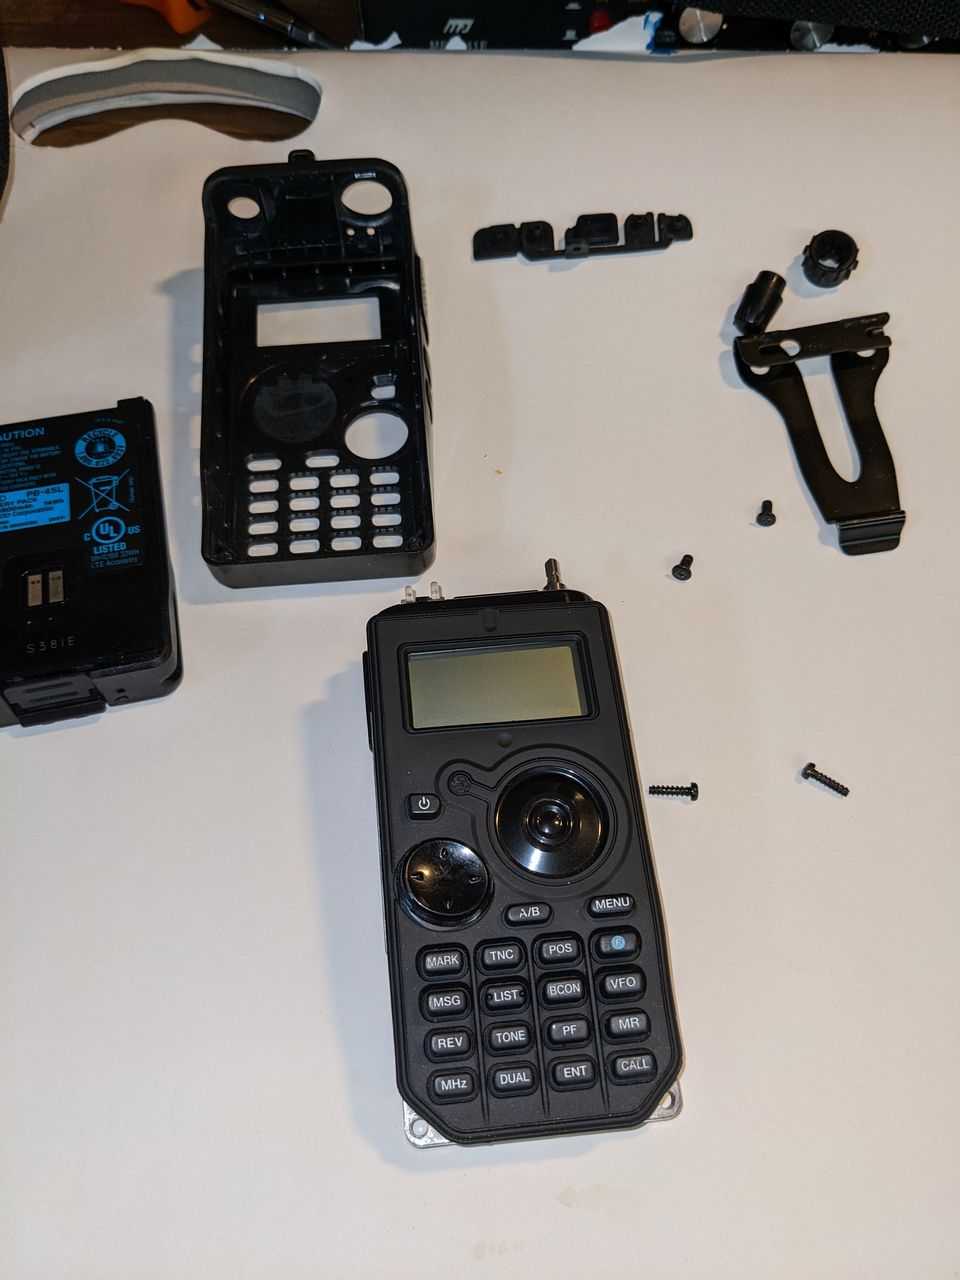 radio with cover removed showing number pad.